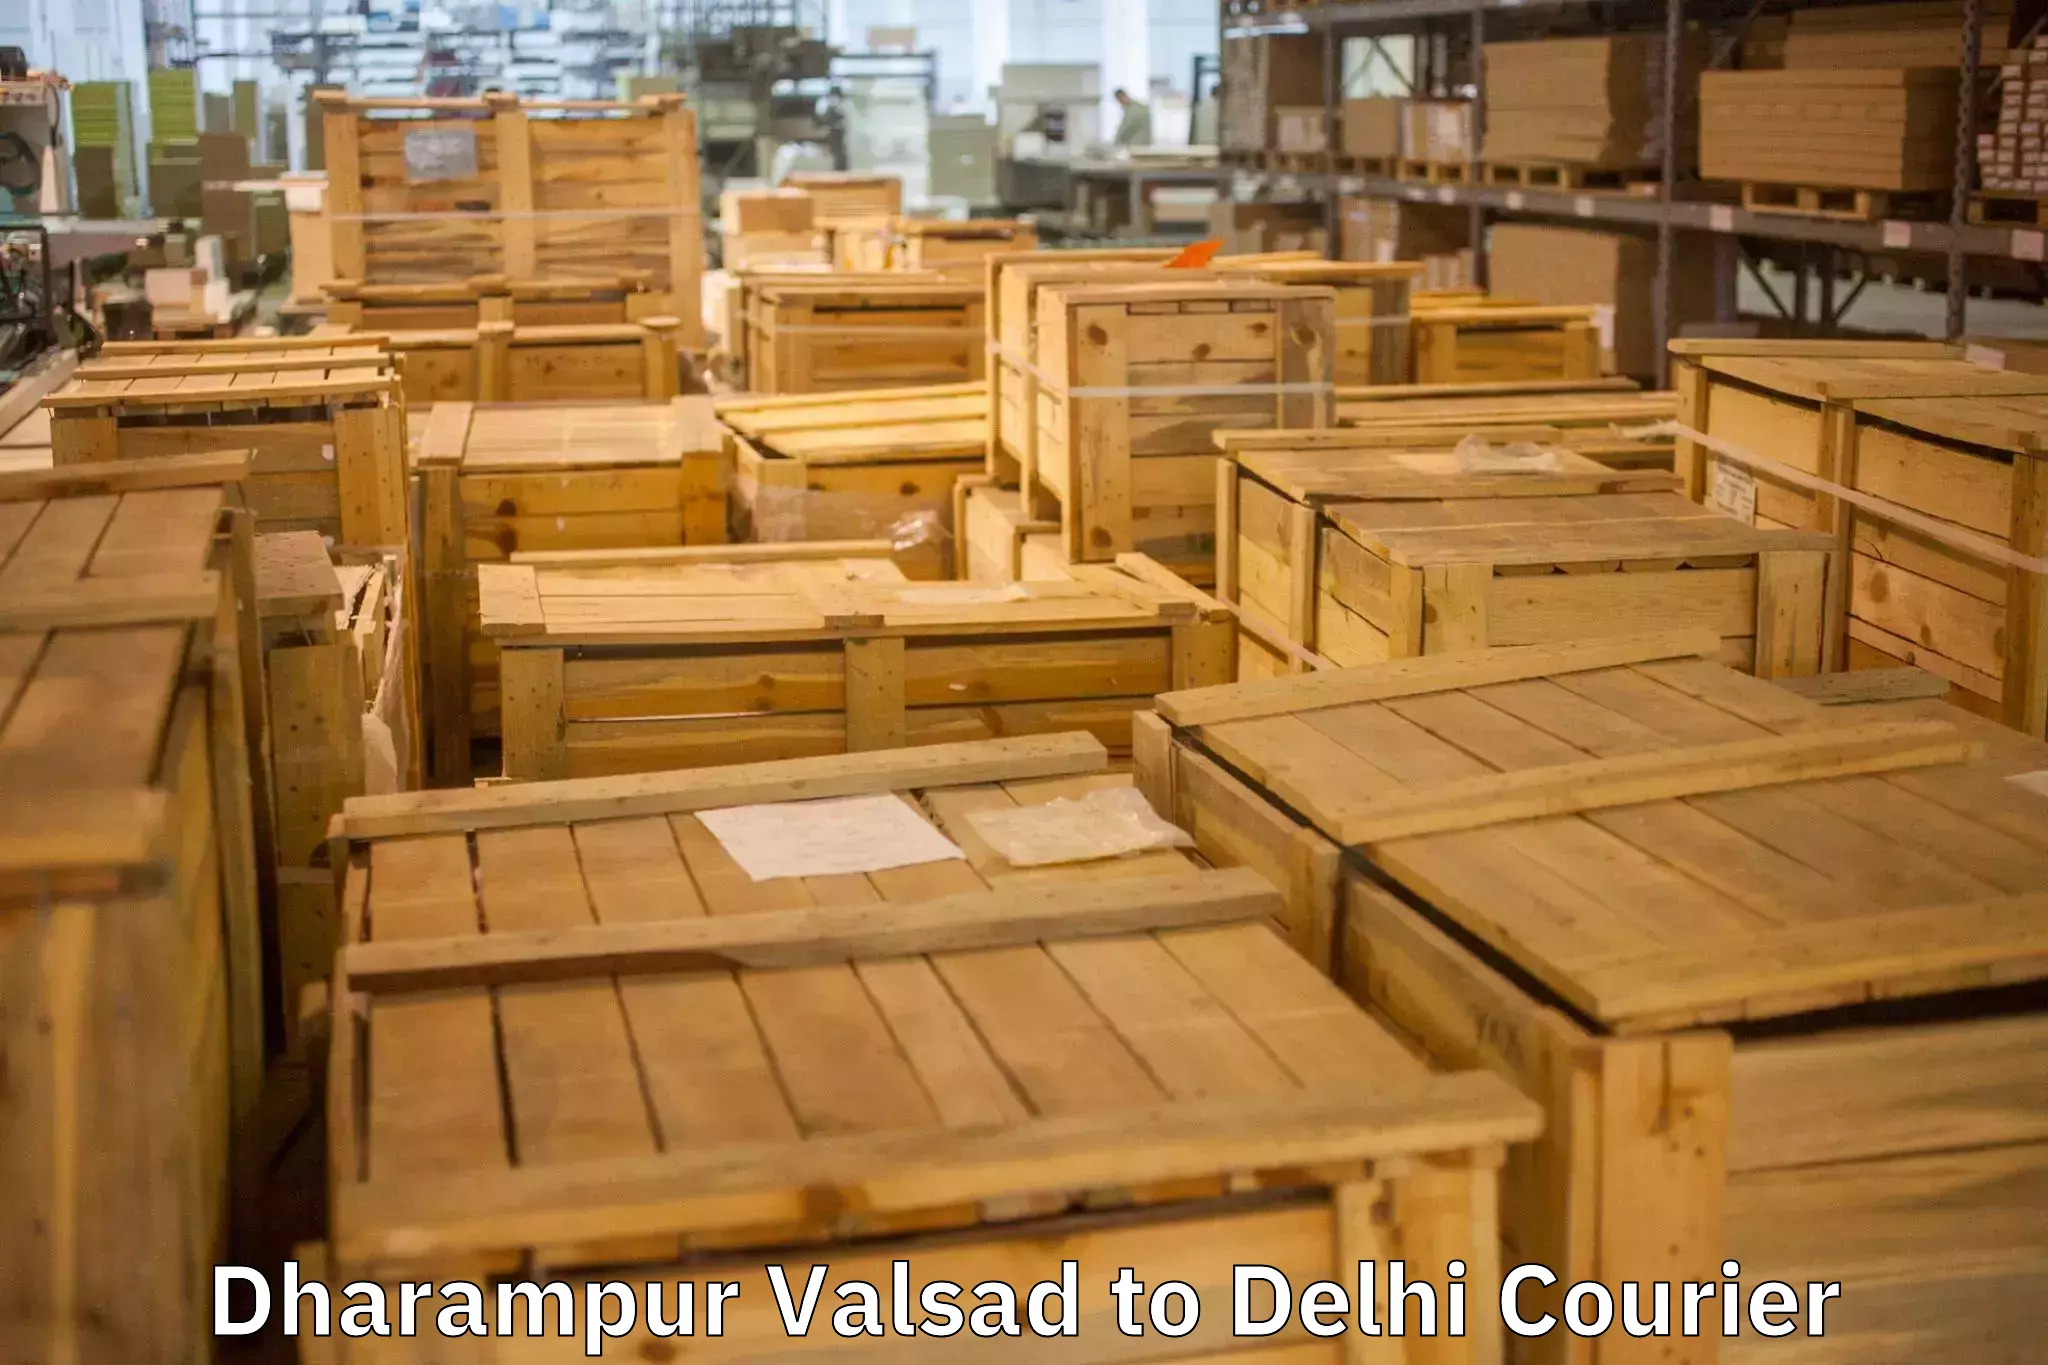 Trusted relocation experts Dharampur Valsad to IIT Delhi